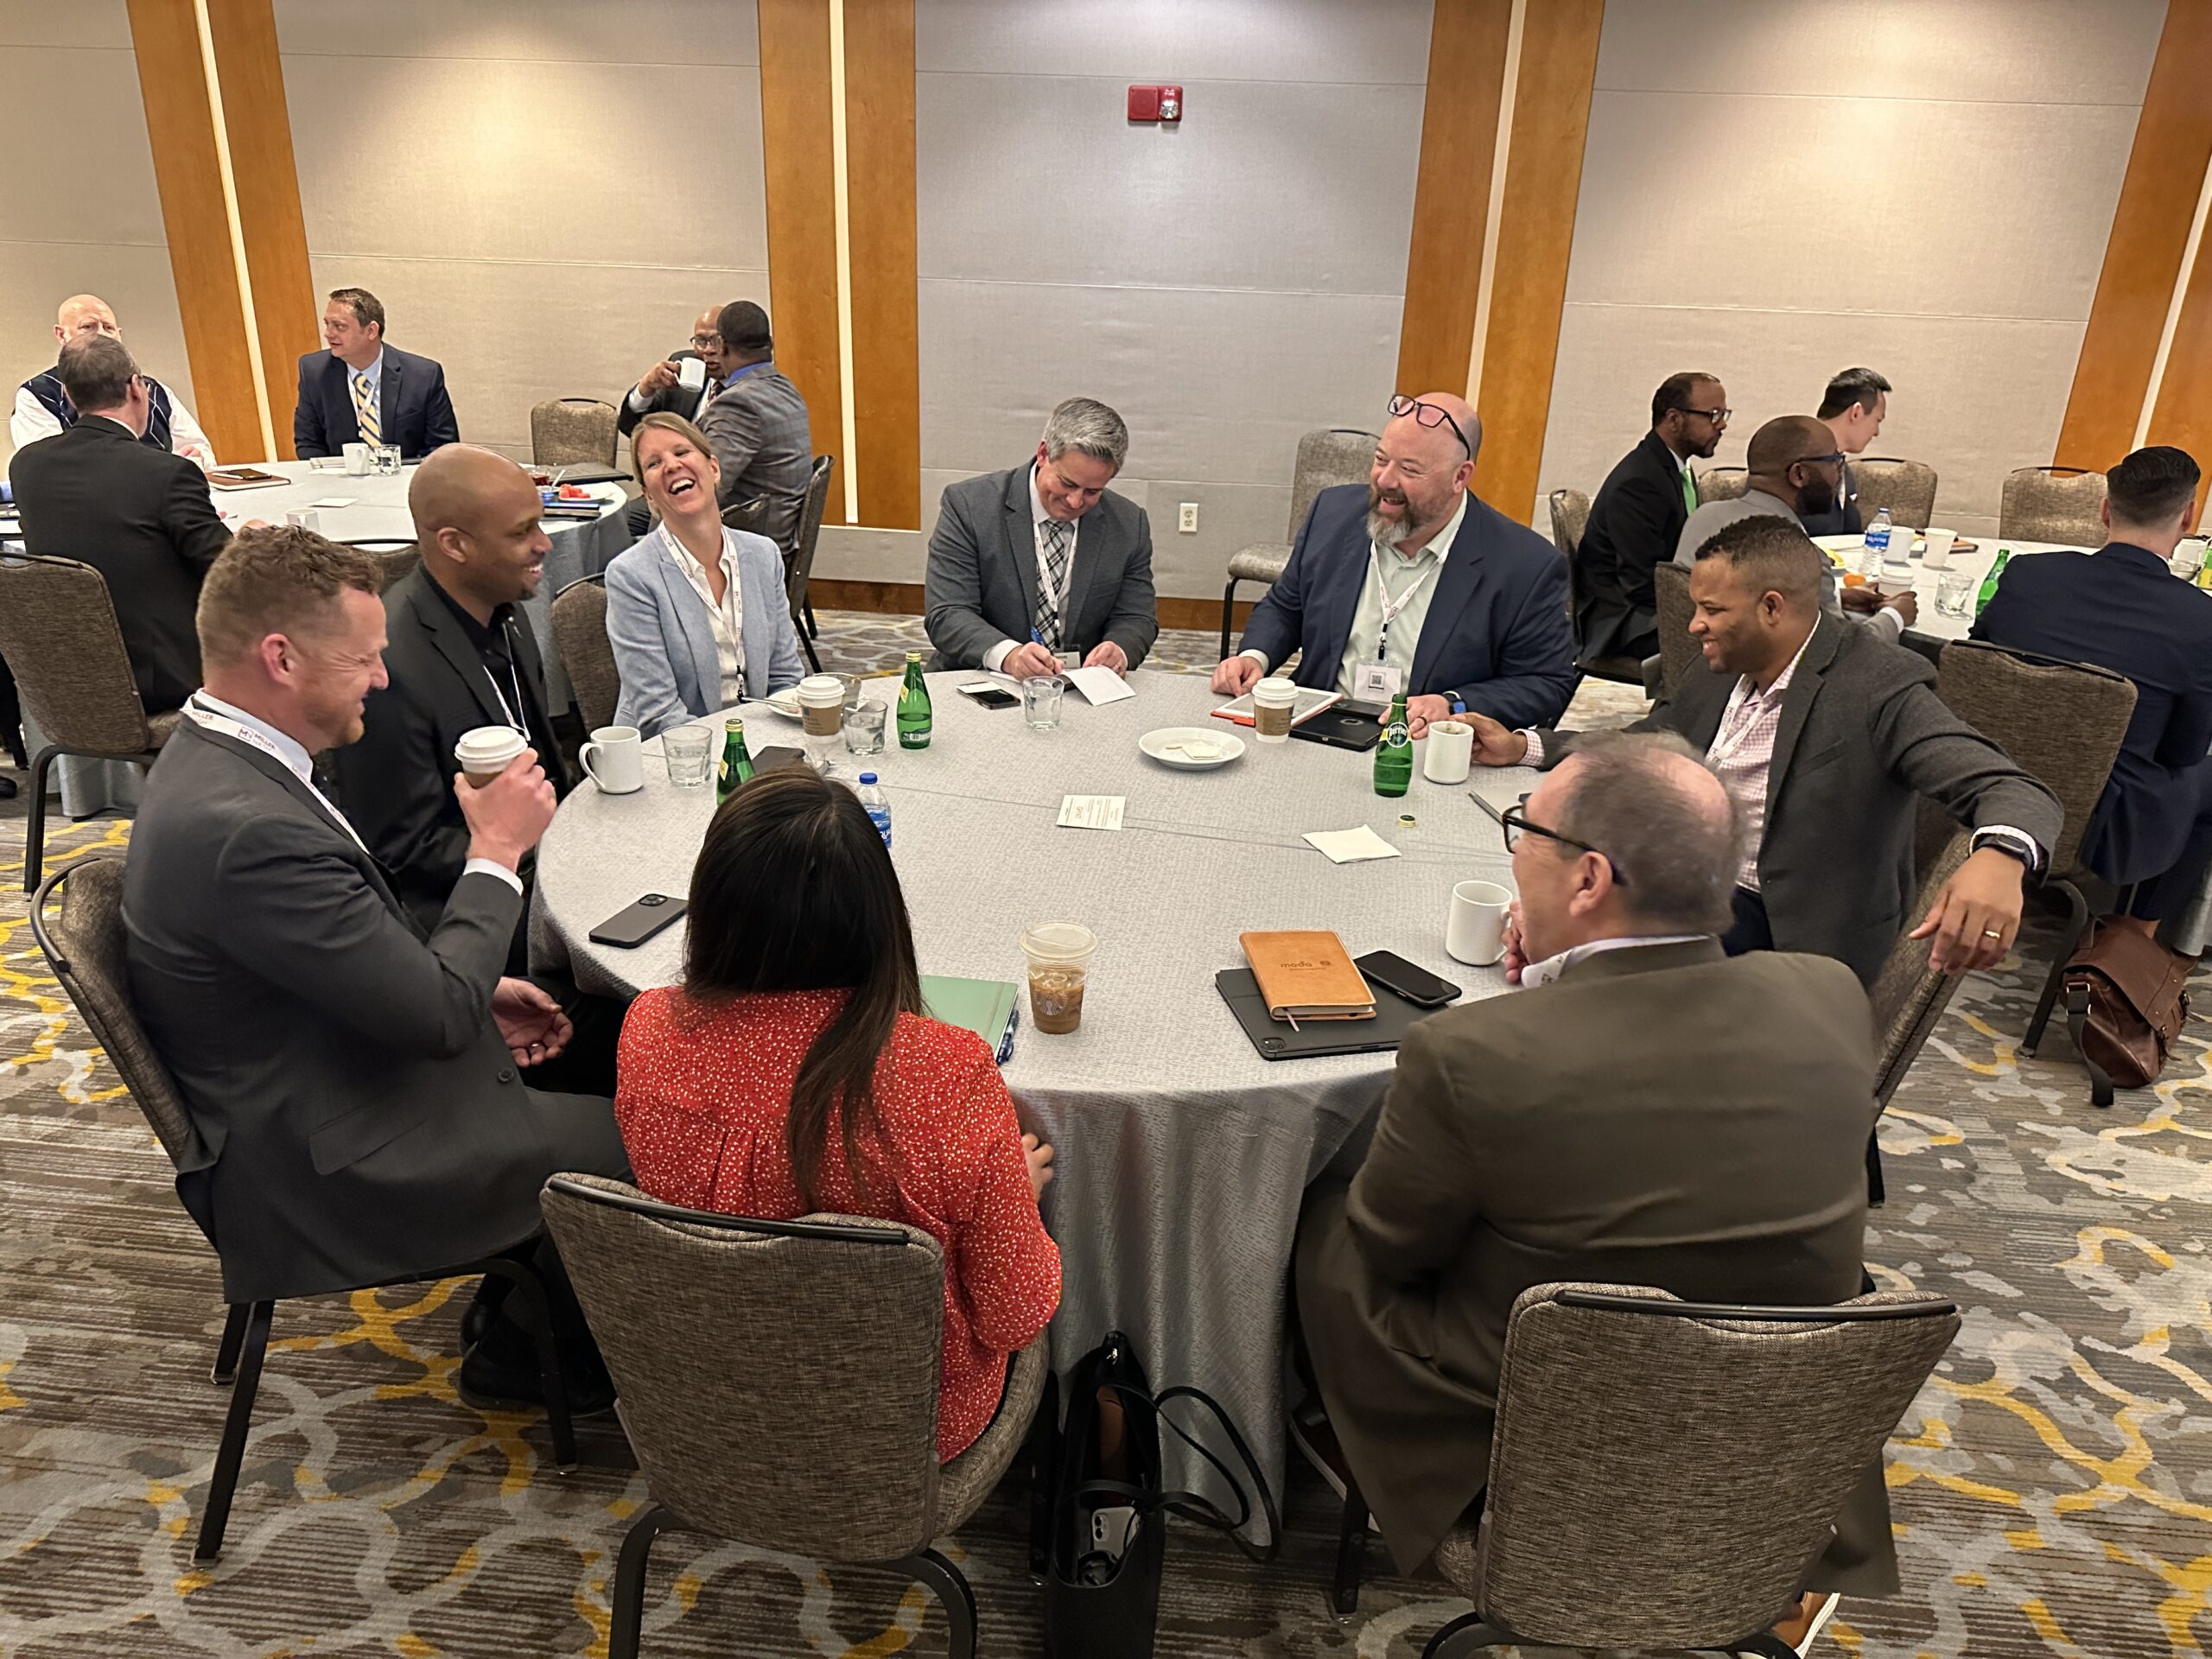 Chamber members talking around a circular table.